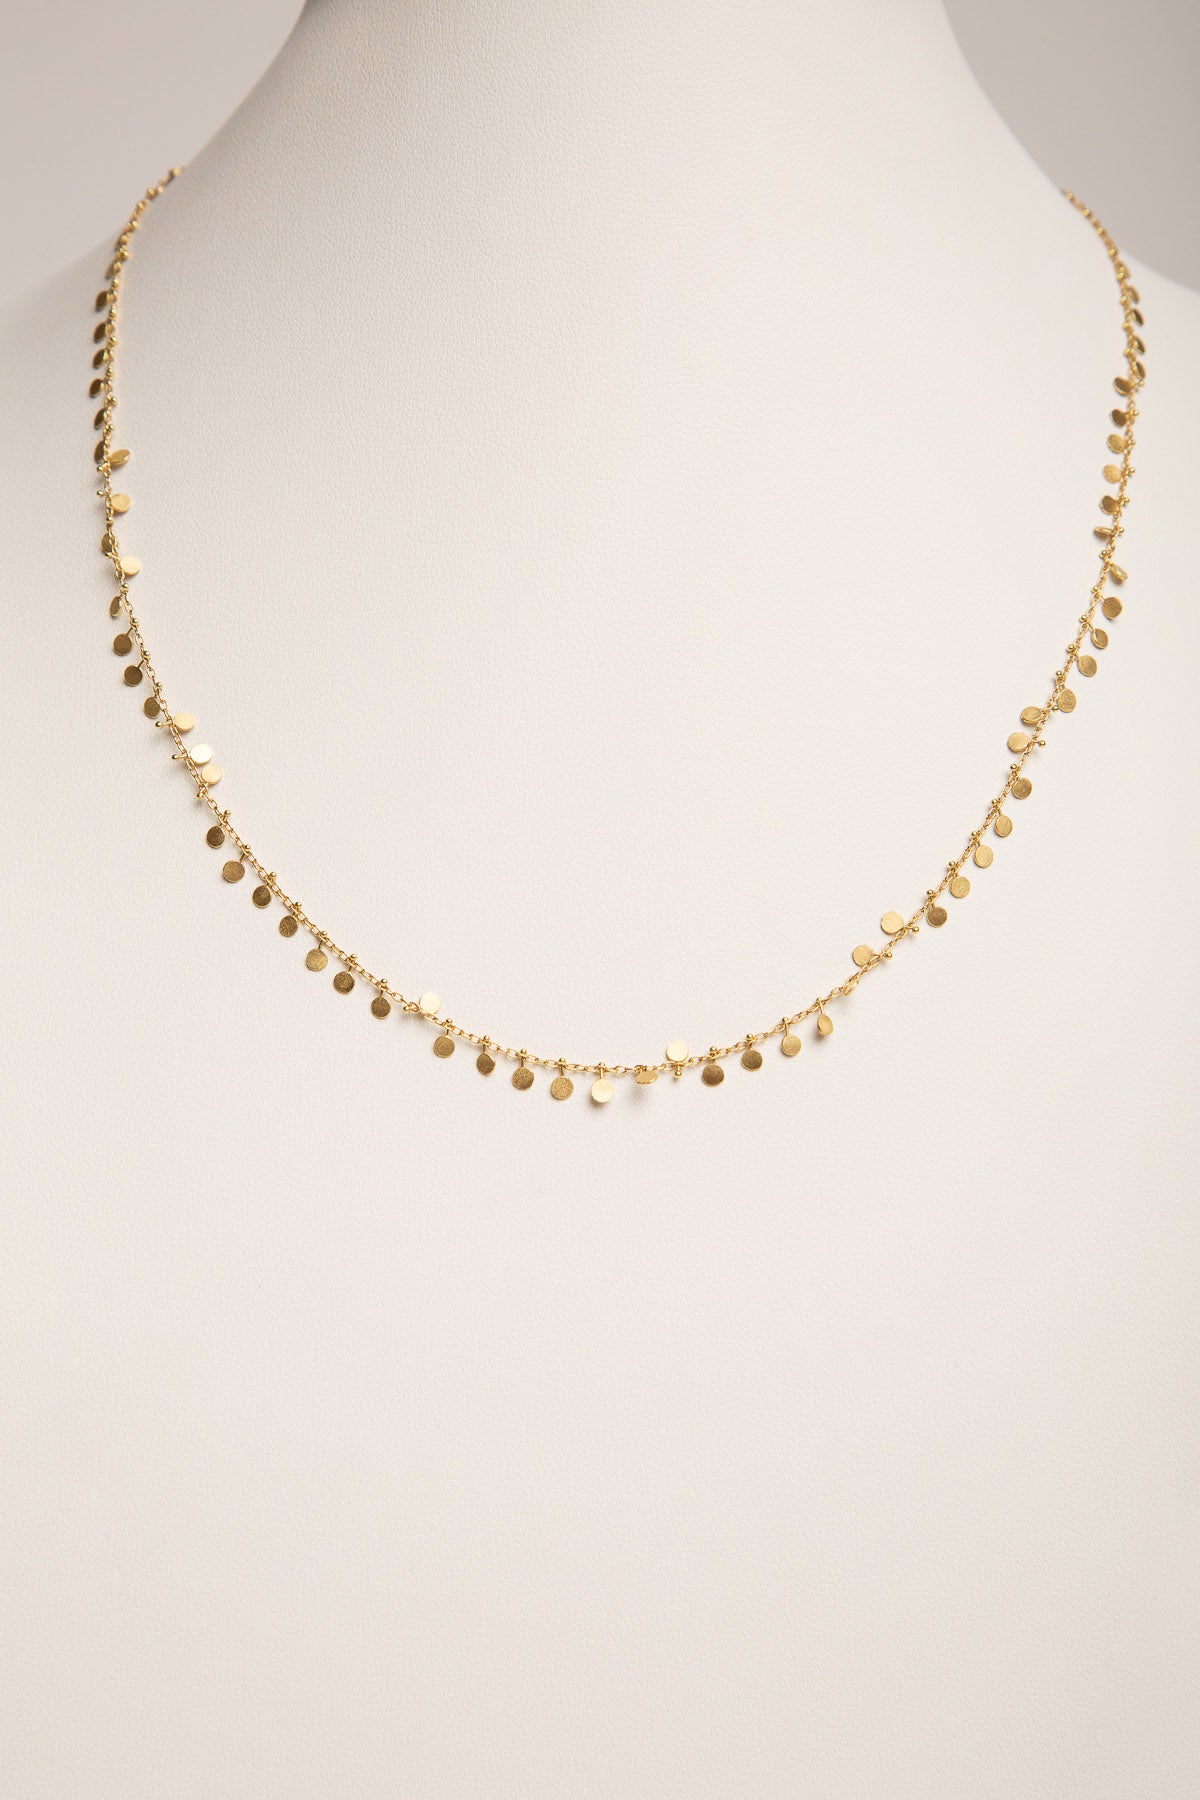 SIA TAYLOR | EVENLY DOTTED GOLD NECKLACE